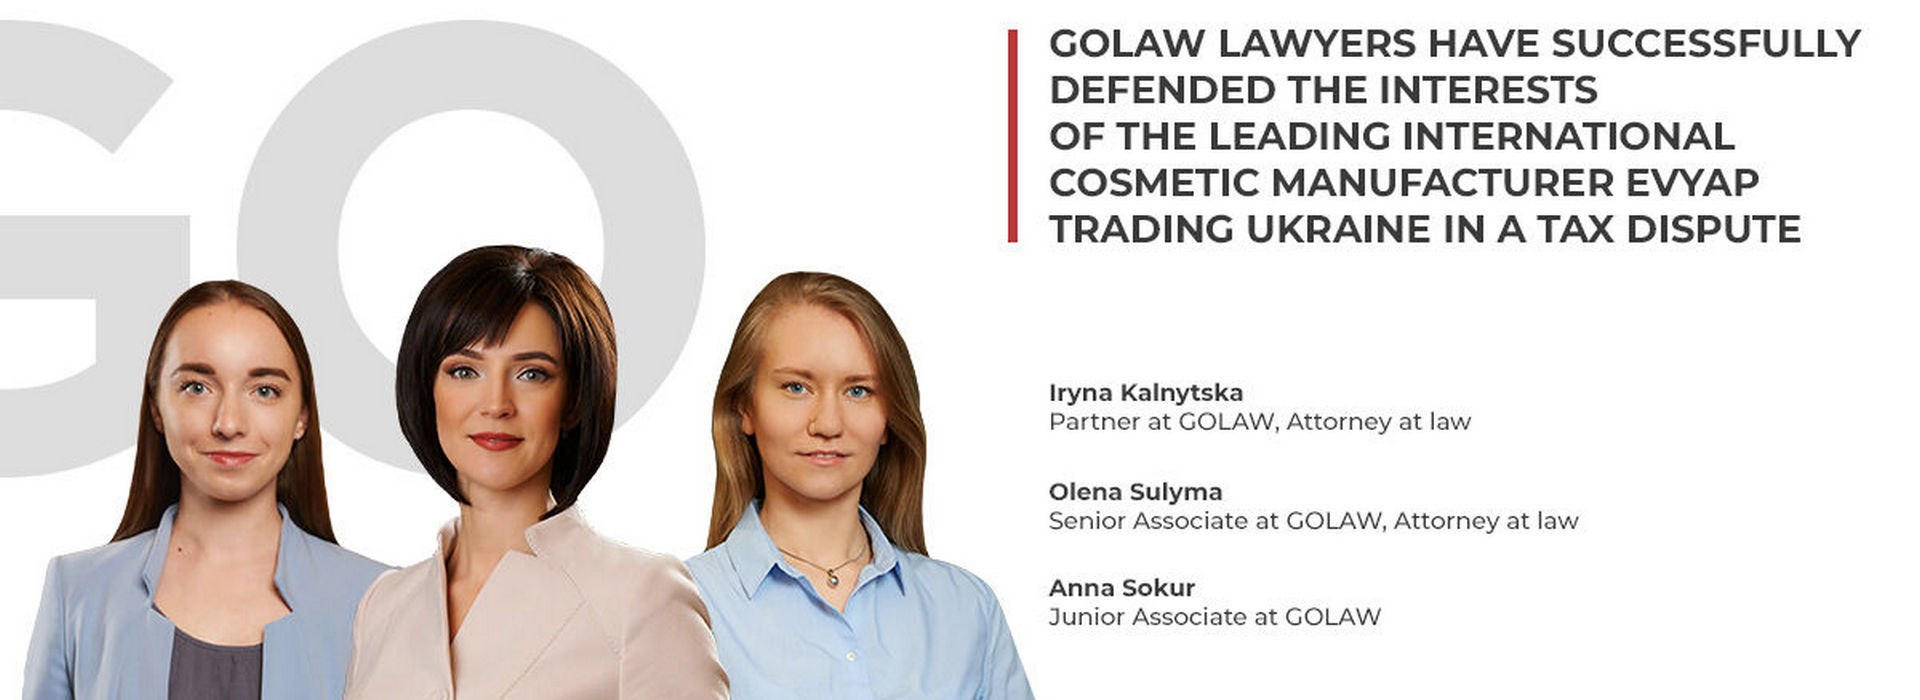 GOLAW Lawyers Have Successfully Defended the Interests of the Leading International Cosmetic Manufacturer Evyap Trading Ukraine in a Tax Dispute